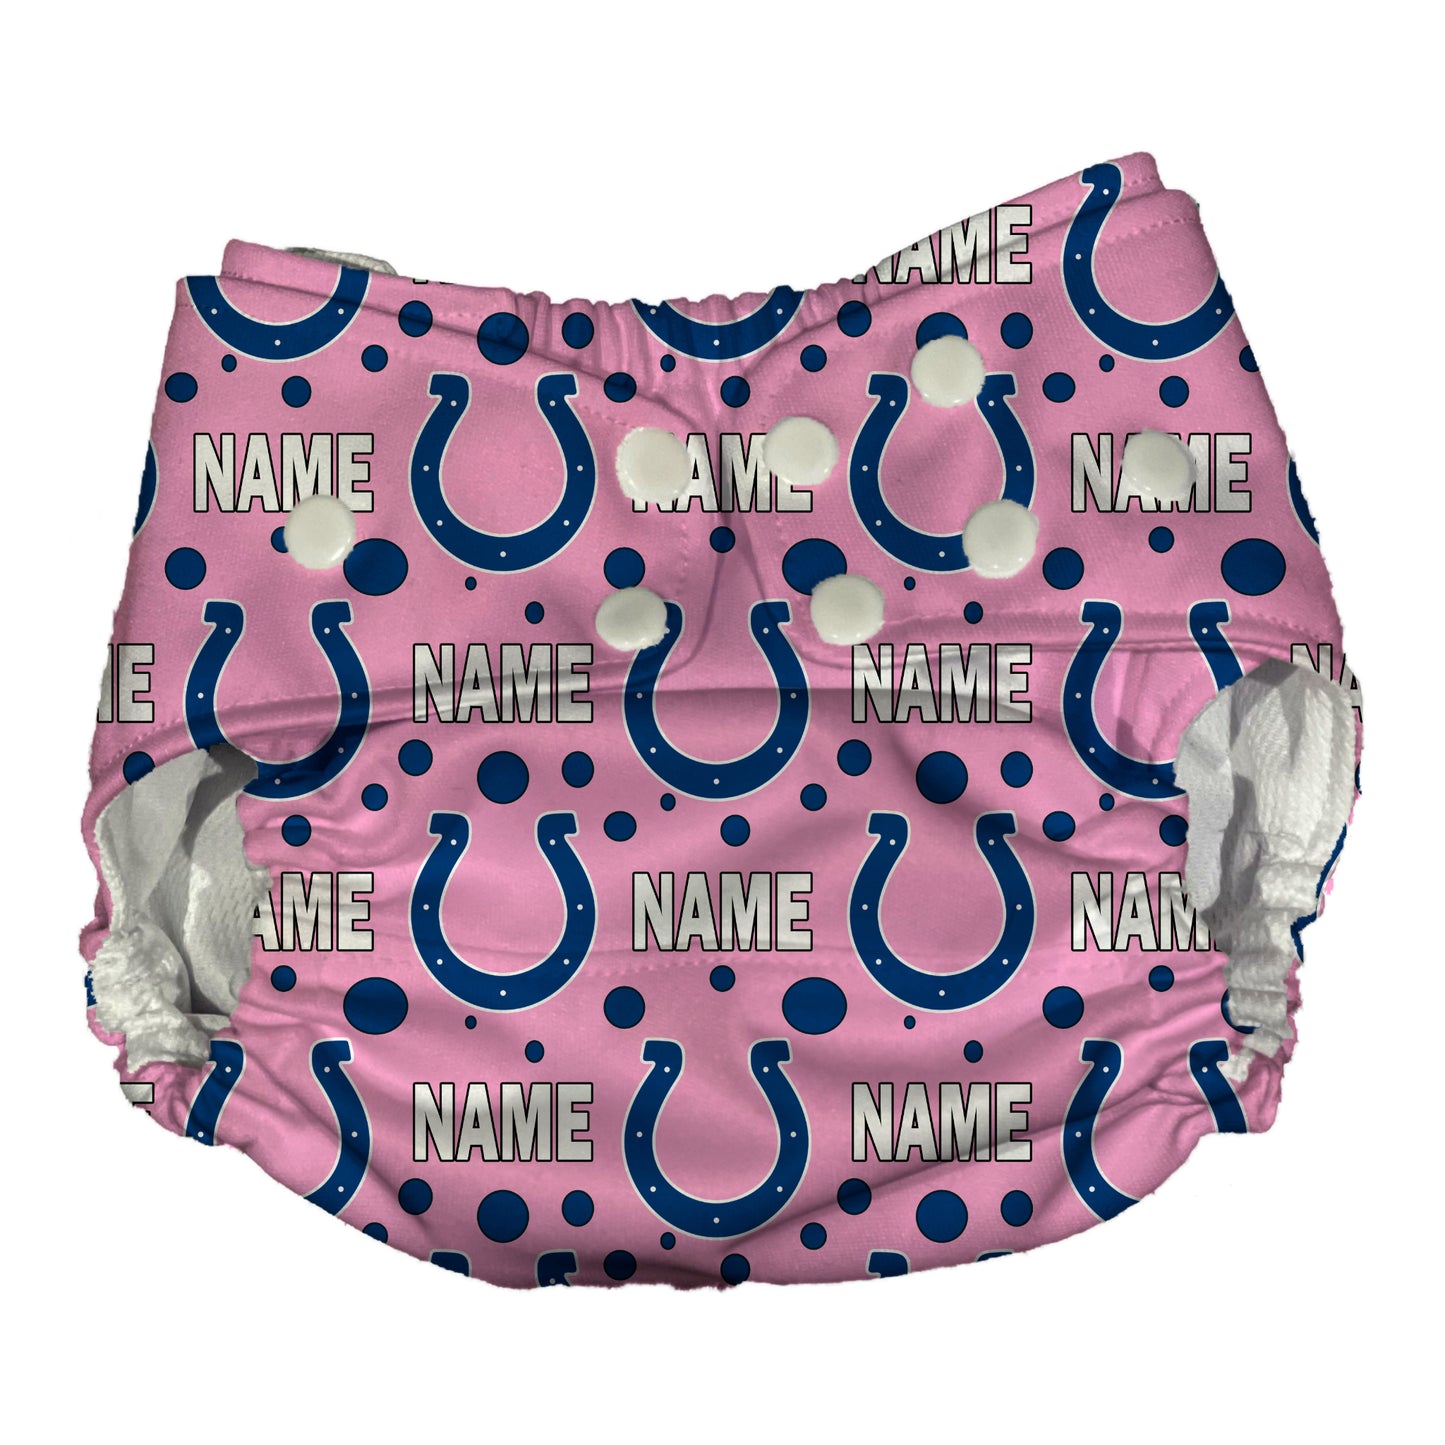 Indianapolis Colts Waterproof Diaper Cover | Reusable Swimmer